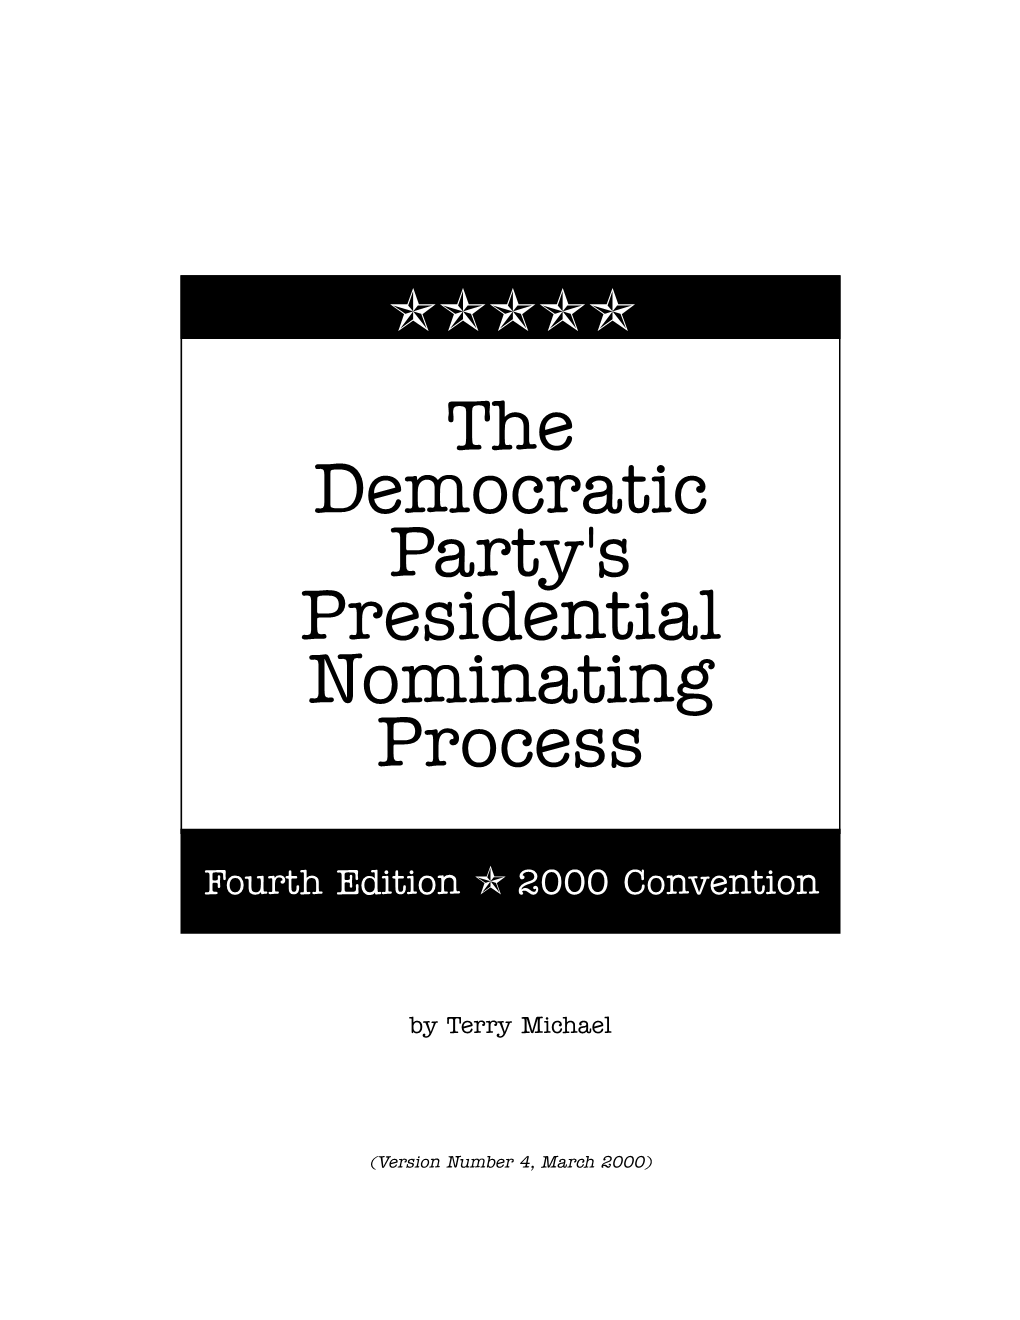 The Democratic Party's Presidential Nominating Process